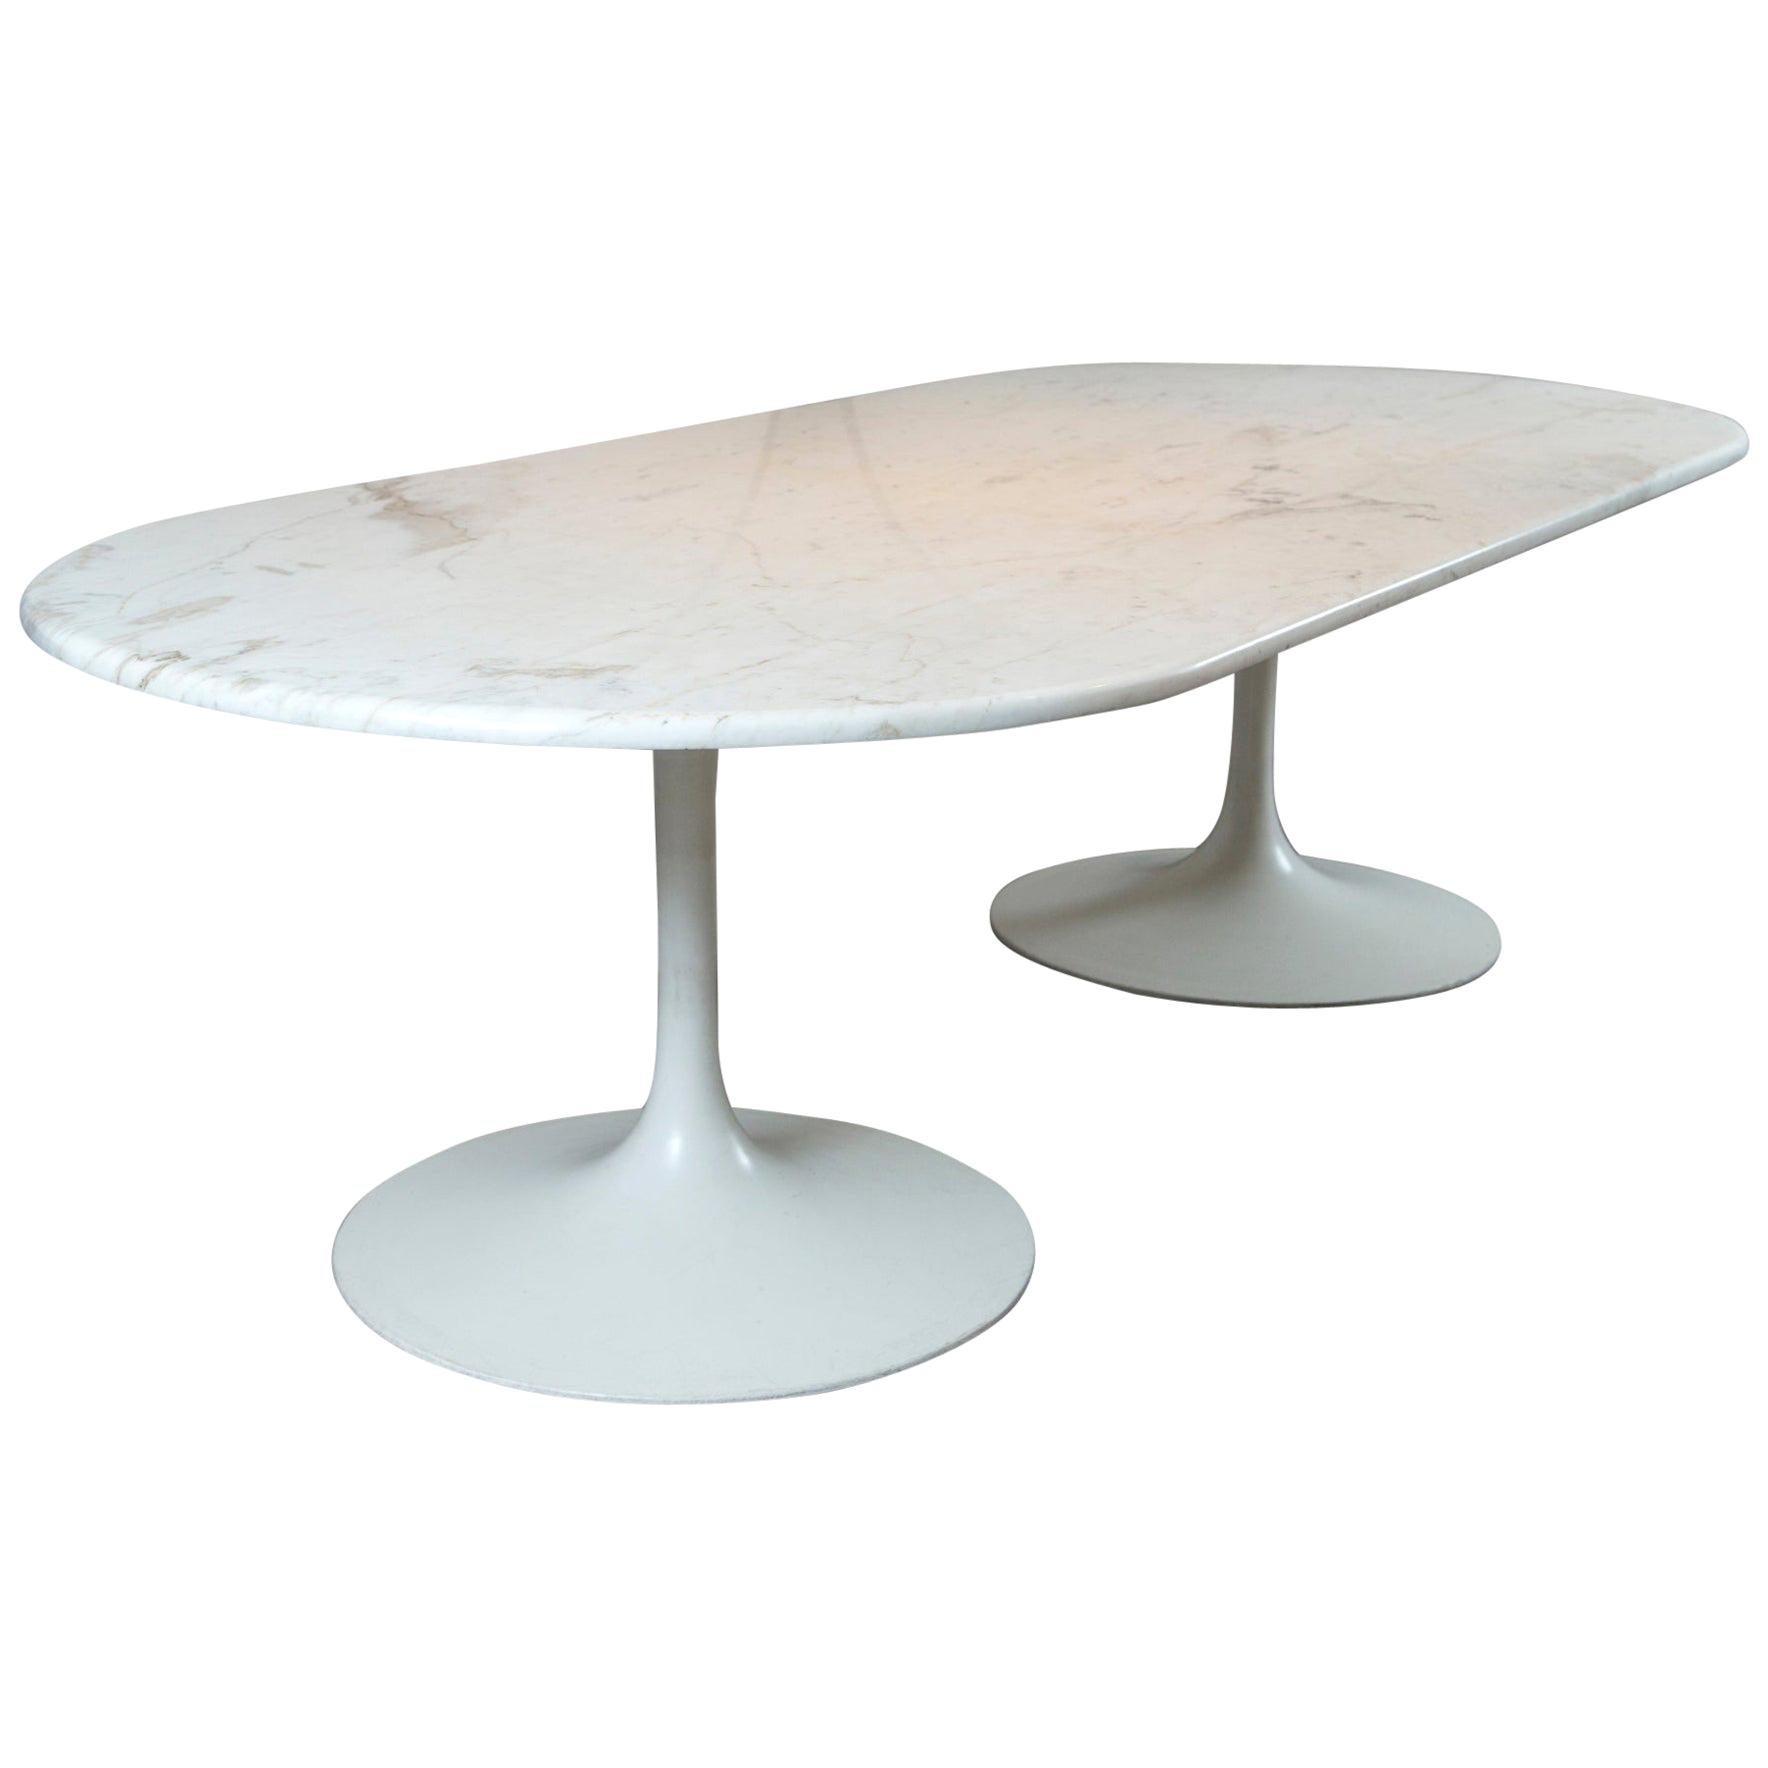 Midcentury Tulip Dining Table Bases Attributed to Saarinen with Marble Top